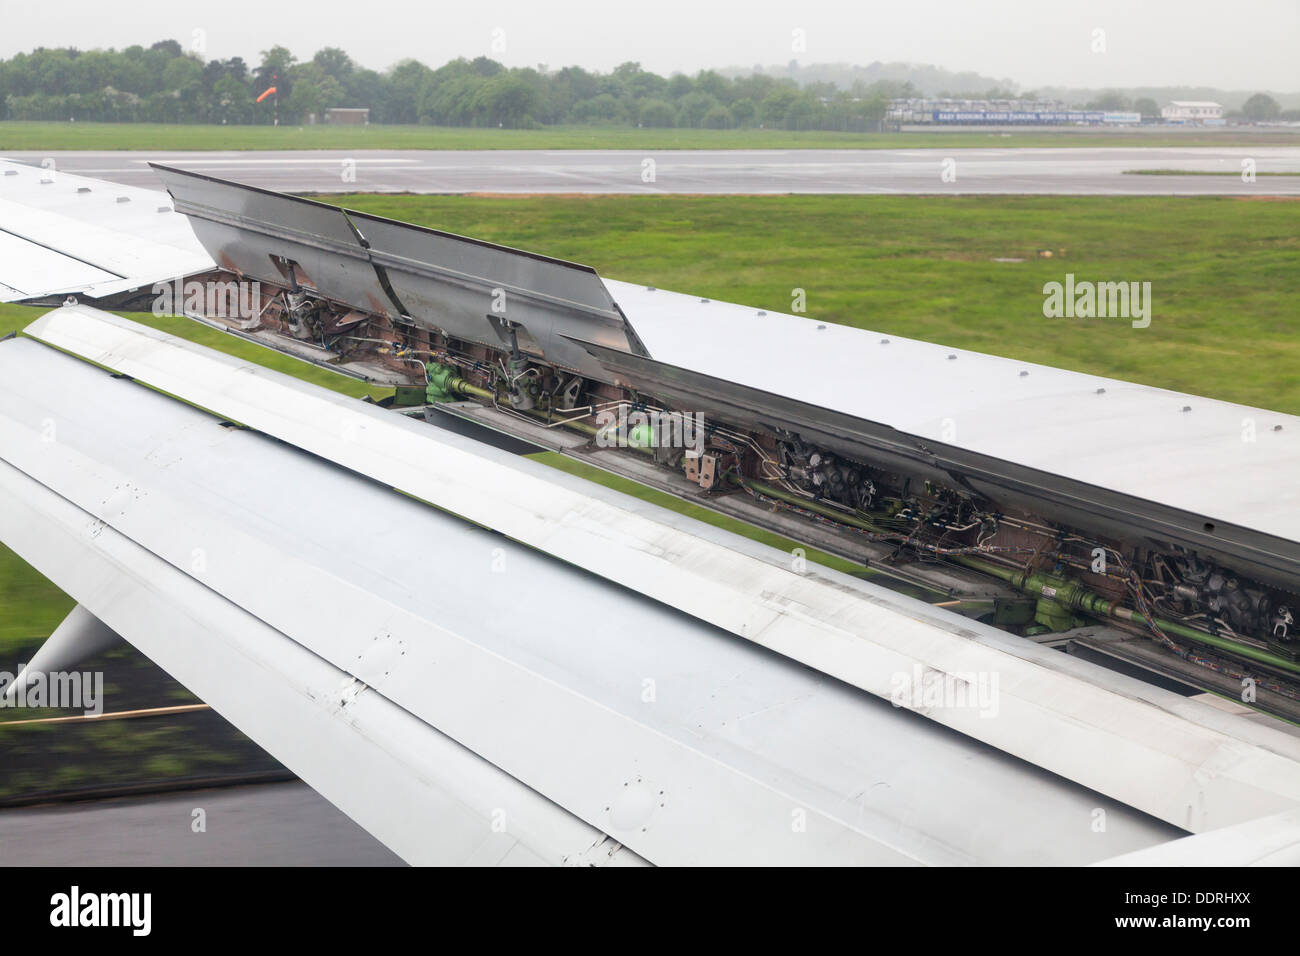 aircraft wing spoiler deployed during landing showing hydraulics Stock Photo